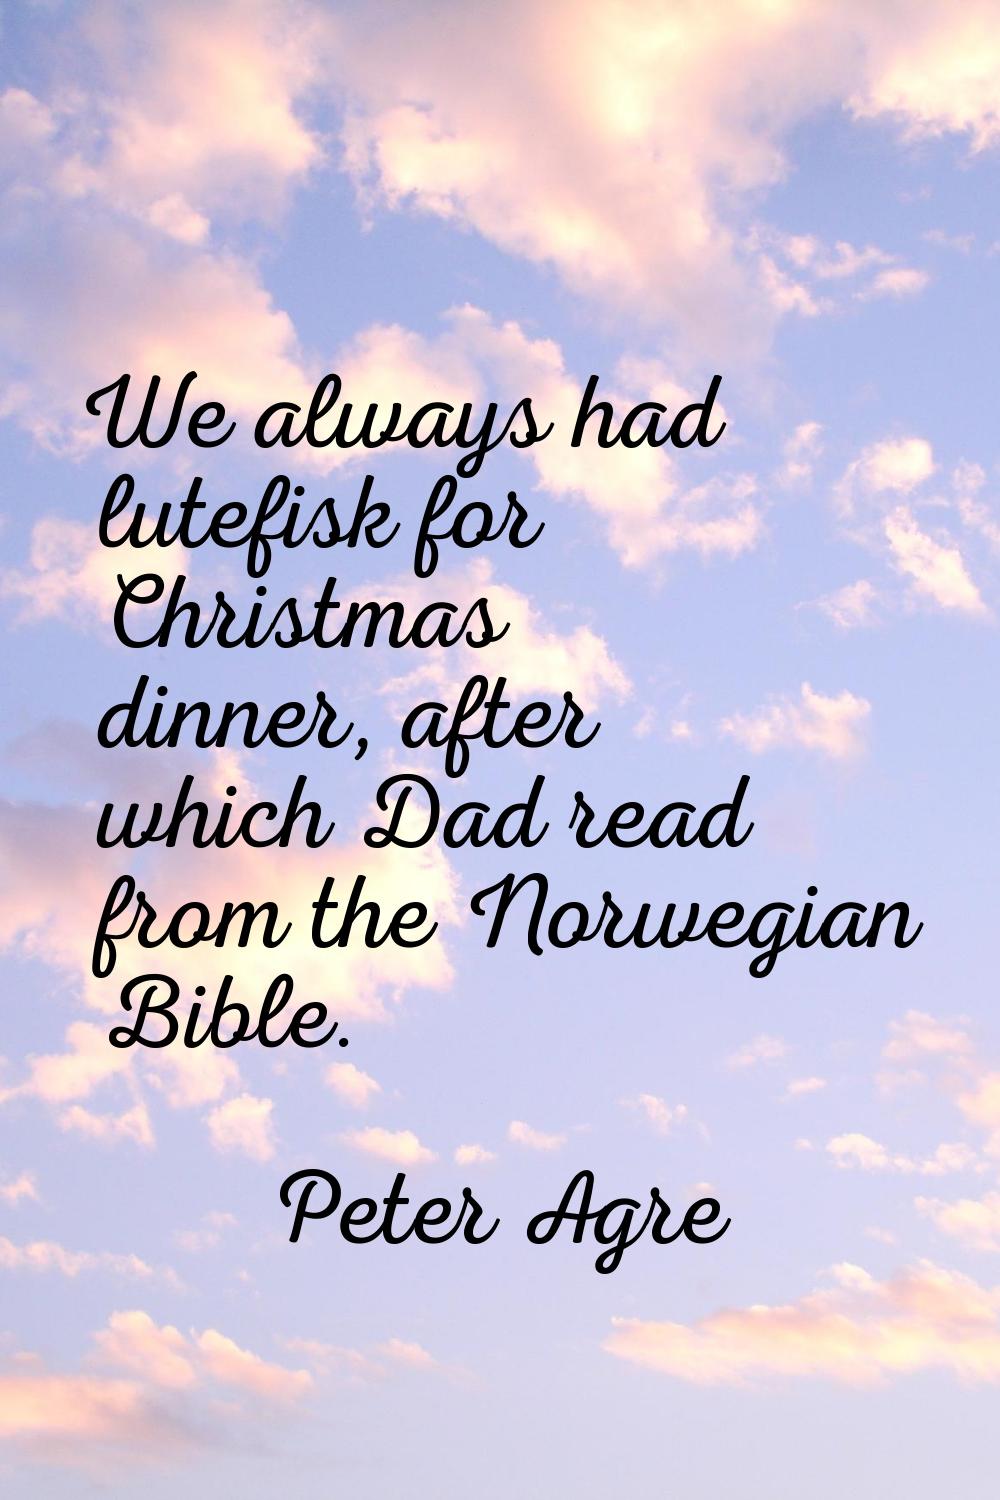 We always had lutefisk for Christmas dinner, after which Dad read from the Norwegian Bible.